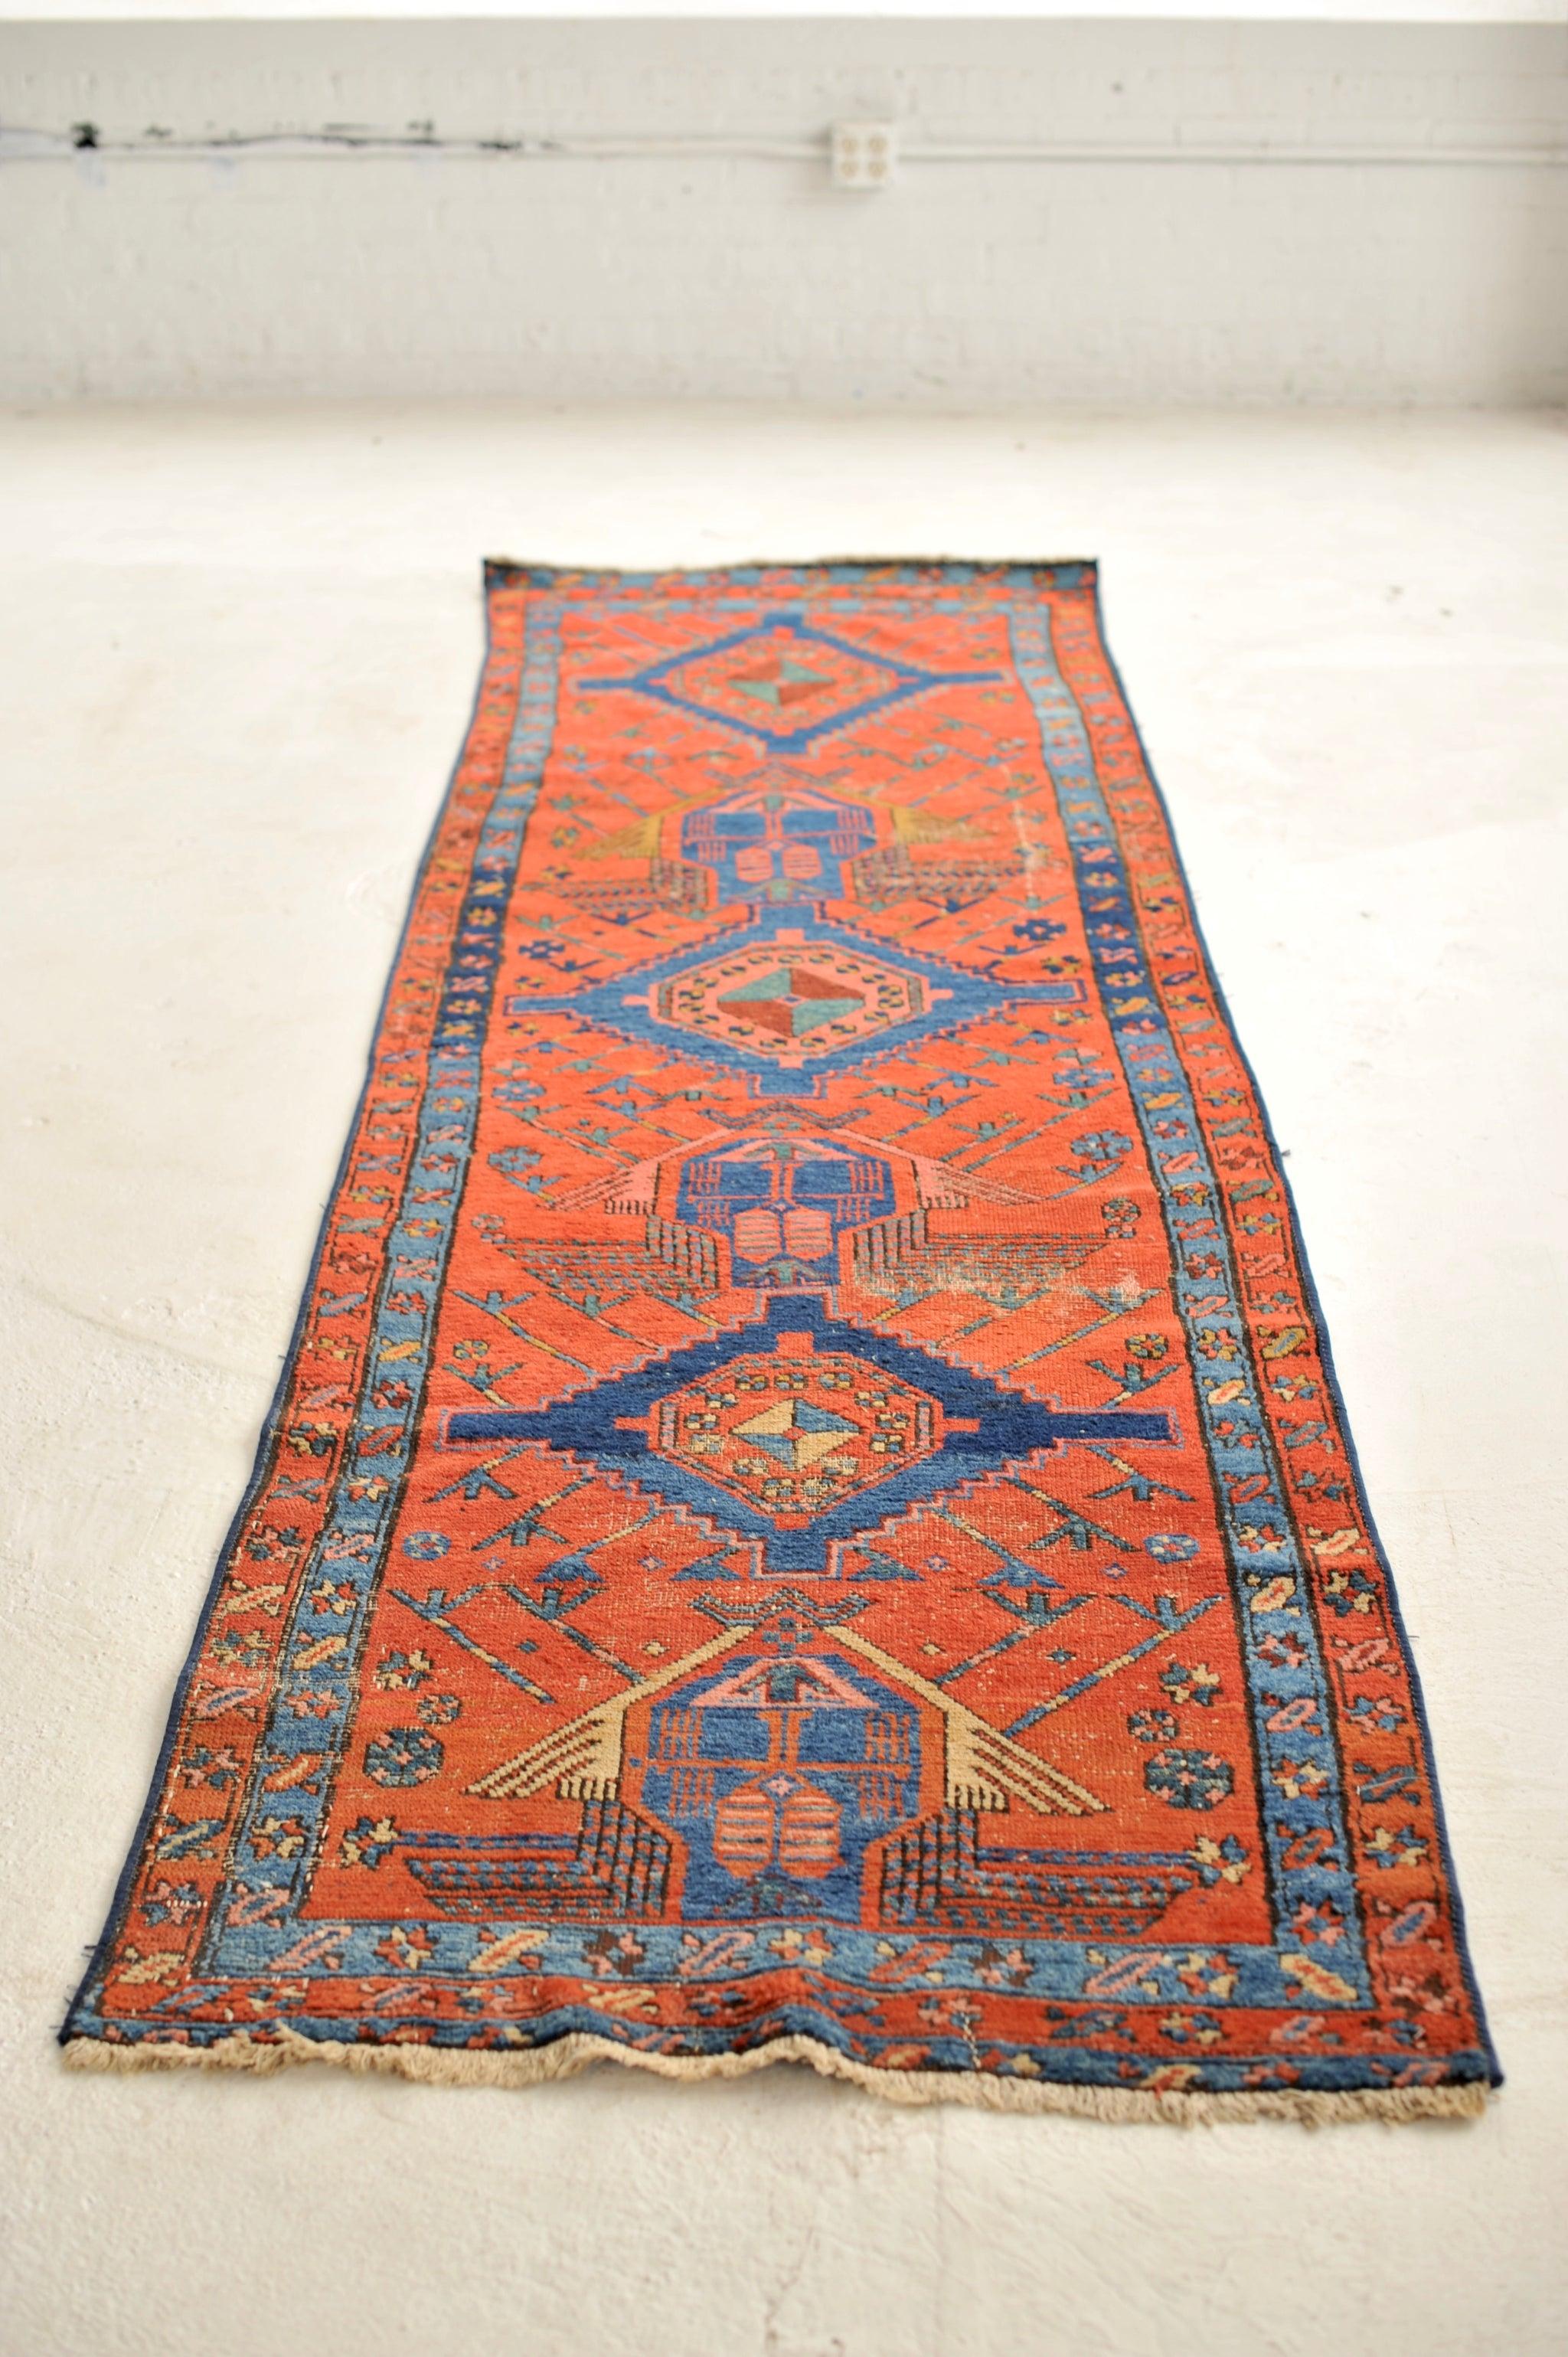 Beautiful Fruit Punch & Ice Blue  Incredible Geometric Tribal Design

About: Incredible piece, very handsome.

Size: 3 x 10.8
Age: Antique with an ancient area of minor responsible restoration - age-related patina.

This rug is one-of-a-kind, only